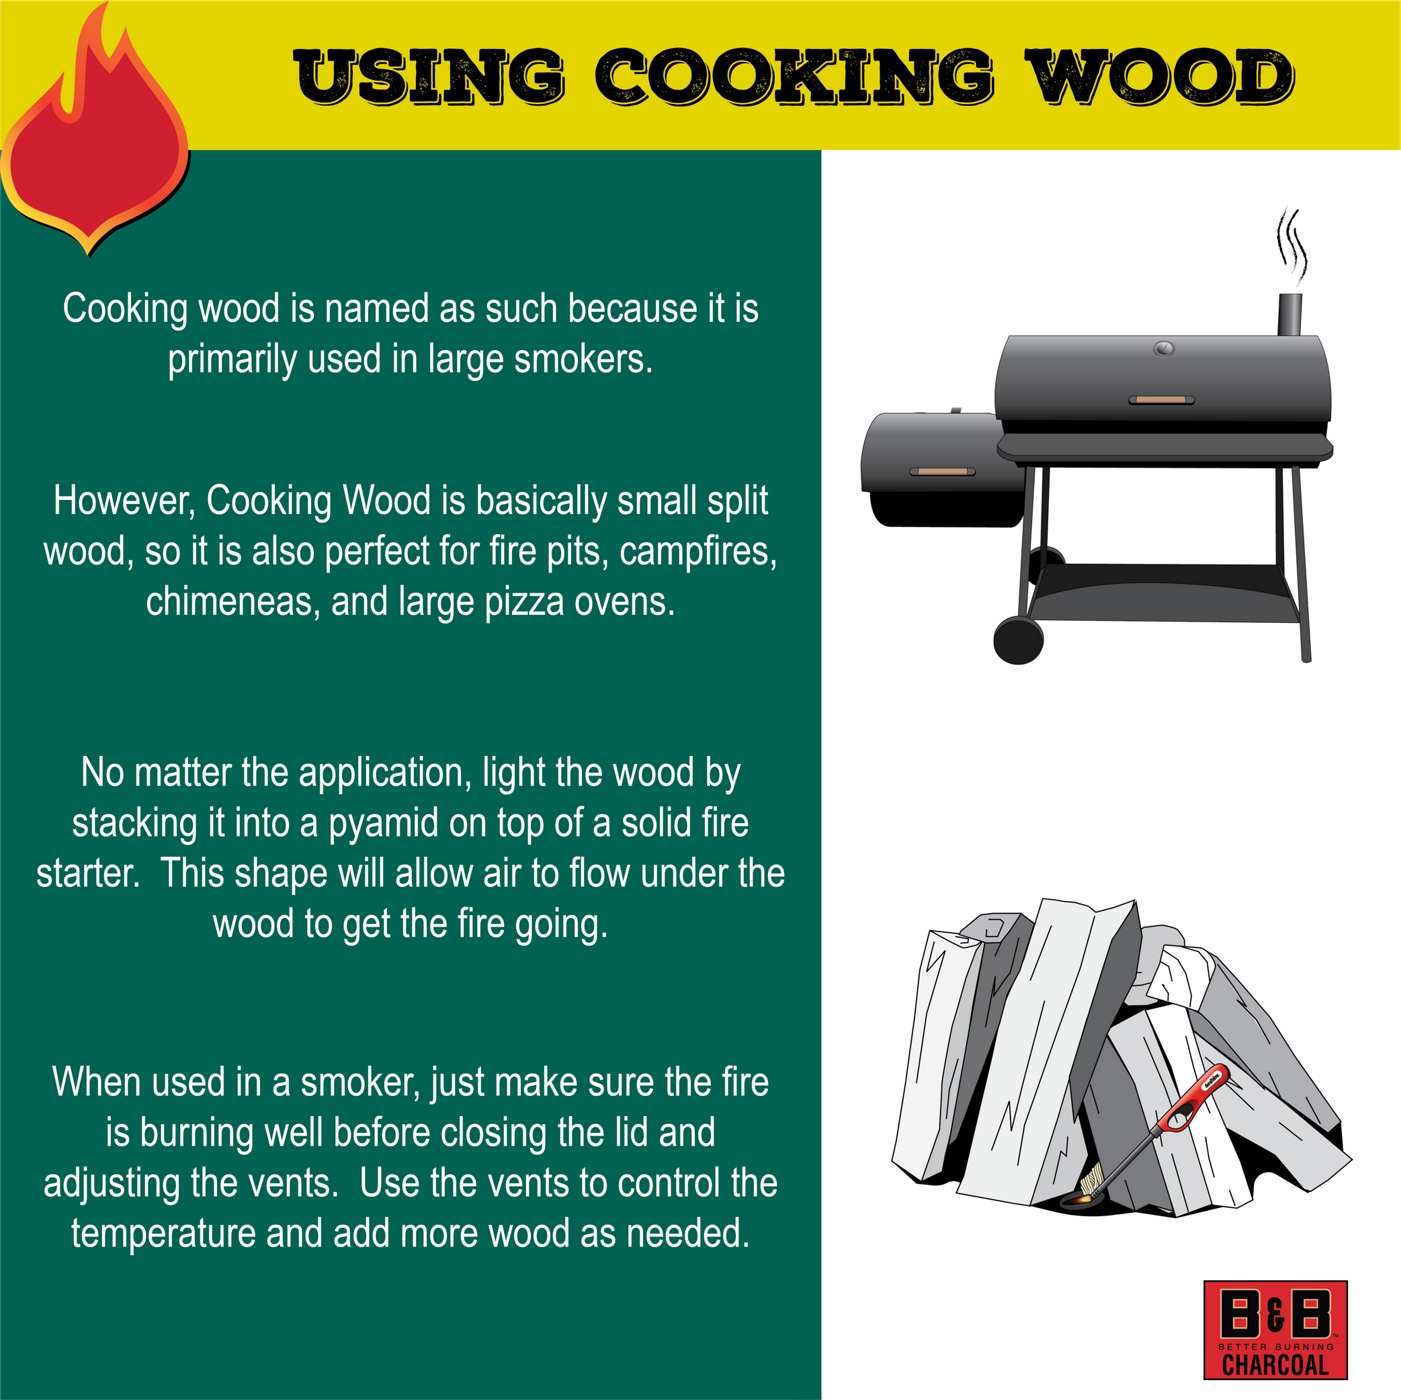 B&B Charcoal Mesquite BBQ & Cooking Wood; image 4 of 4